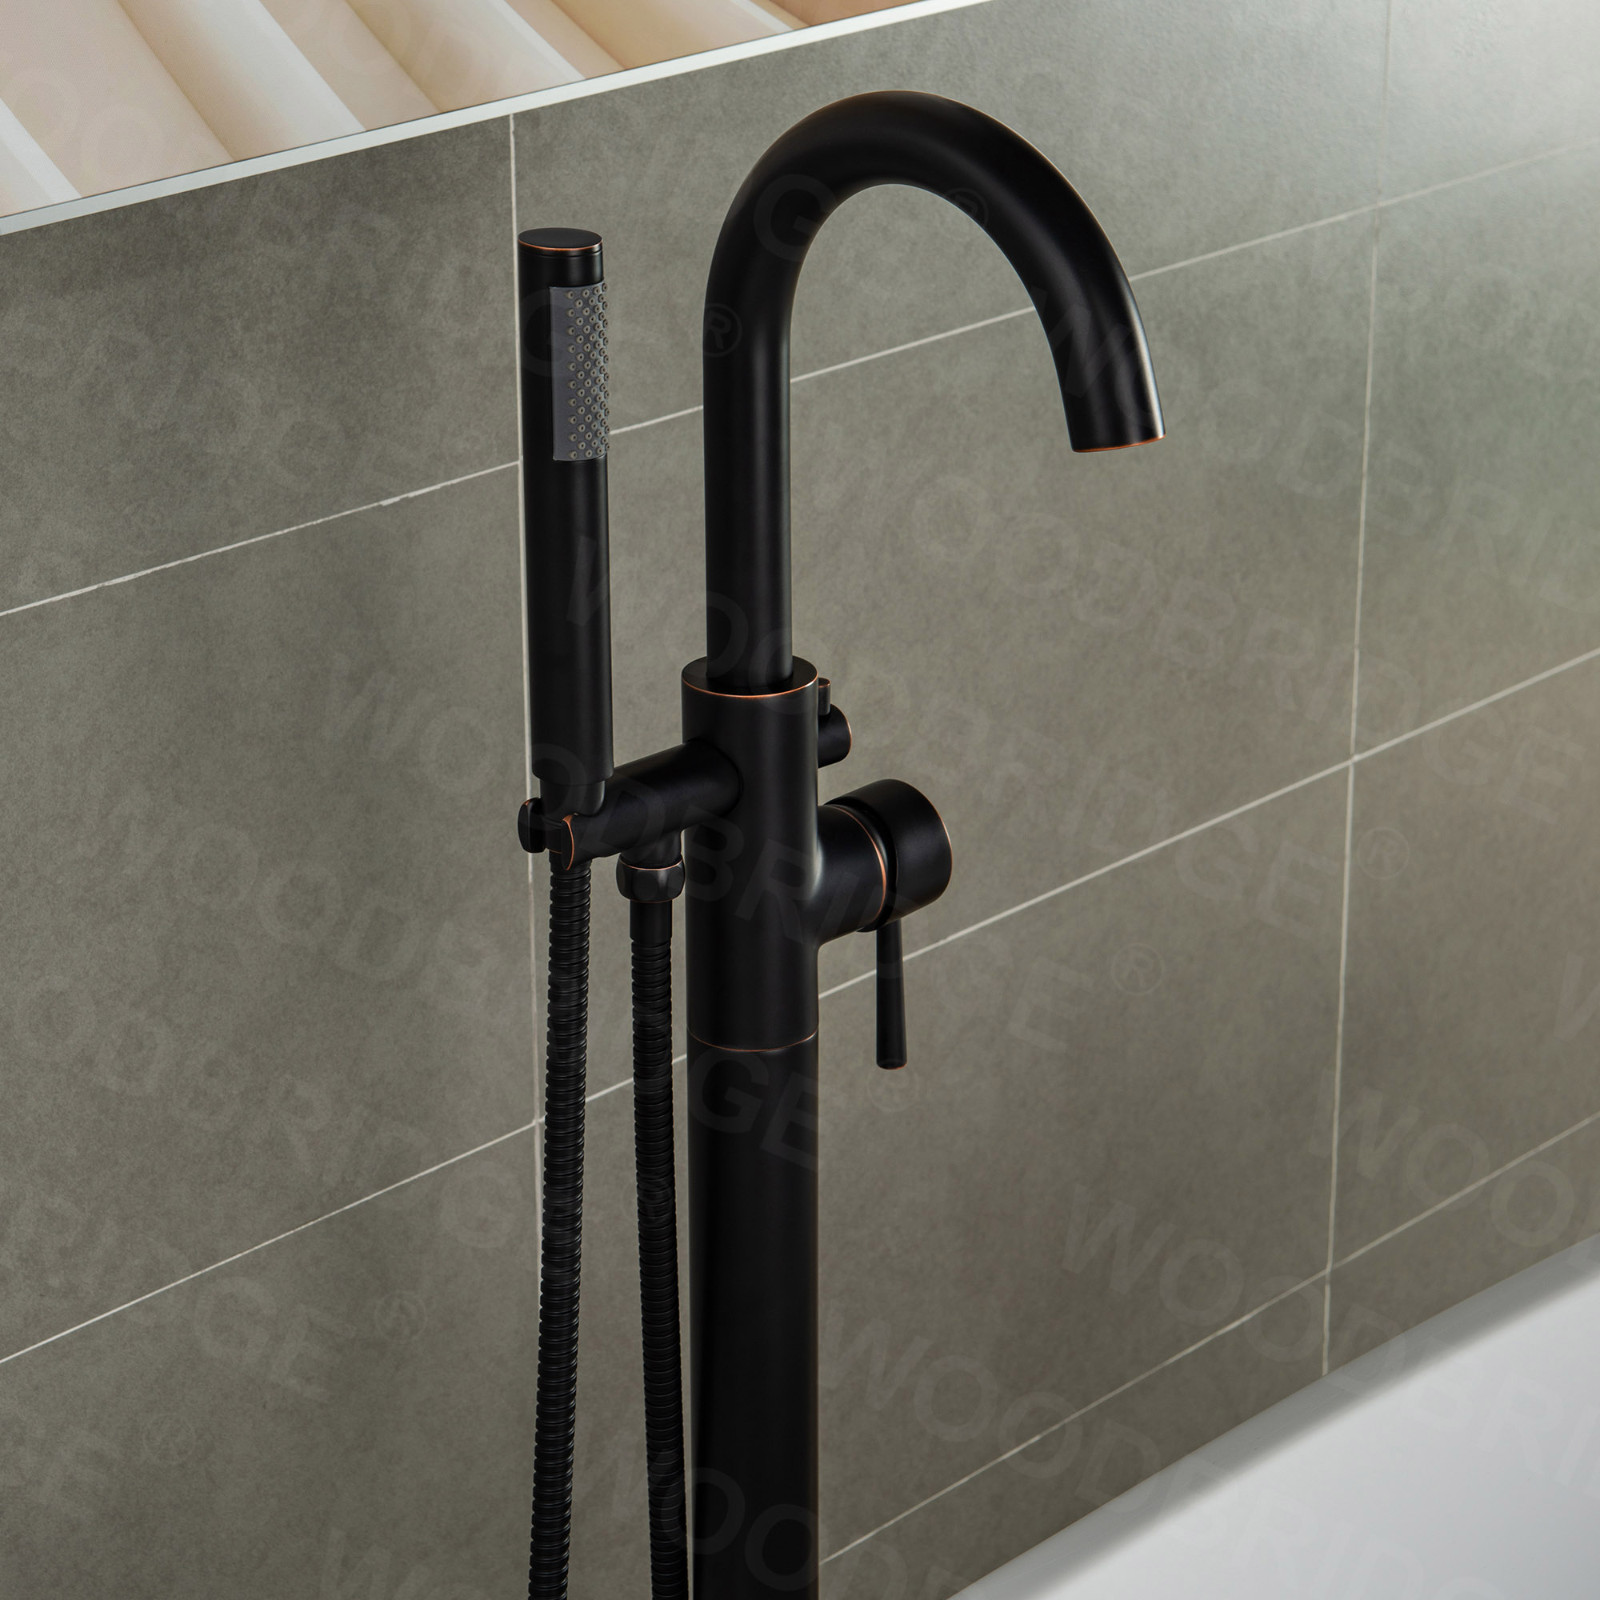  WOODBRIDGE F0010ORBRD Contemporary Single Handle Floor Mount Freestanding Tub Filler Faucet with Hand shower in Oil Rubbed Bronze Finish._9710